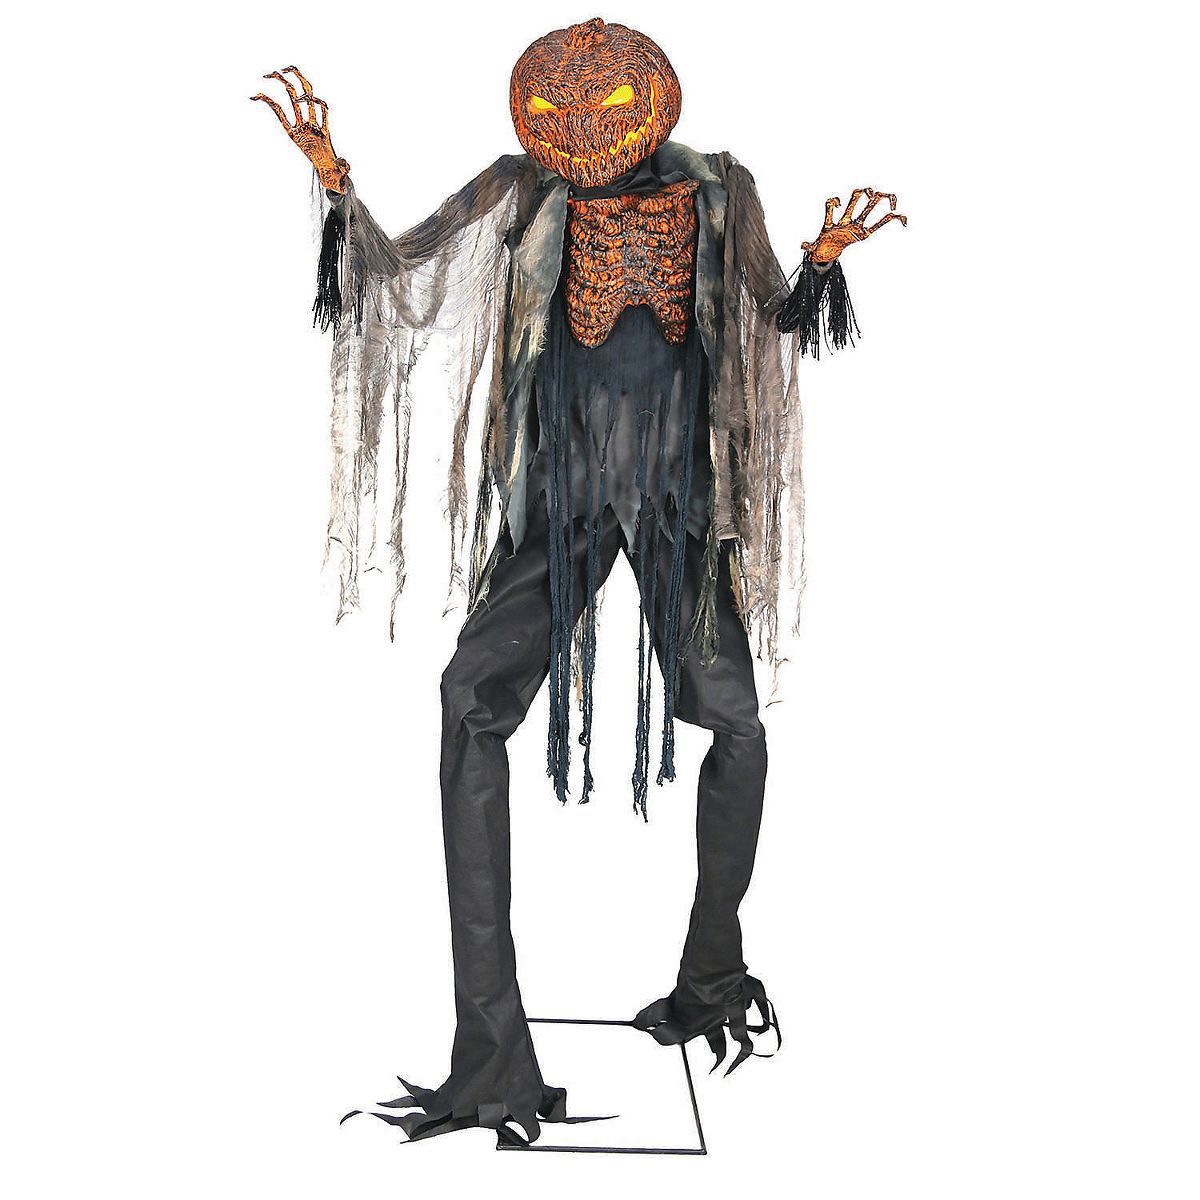 Halloween Express  Scorched Scarecrow Animated Halloween Decoration - Size 7 ft - Black | Target